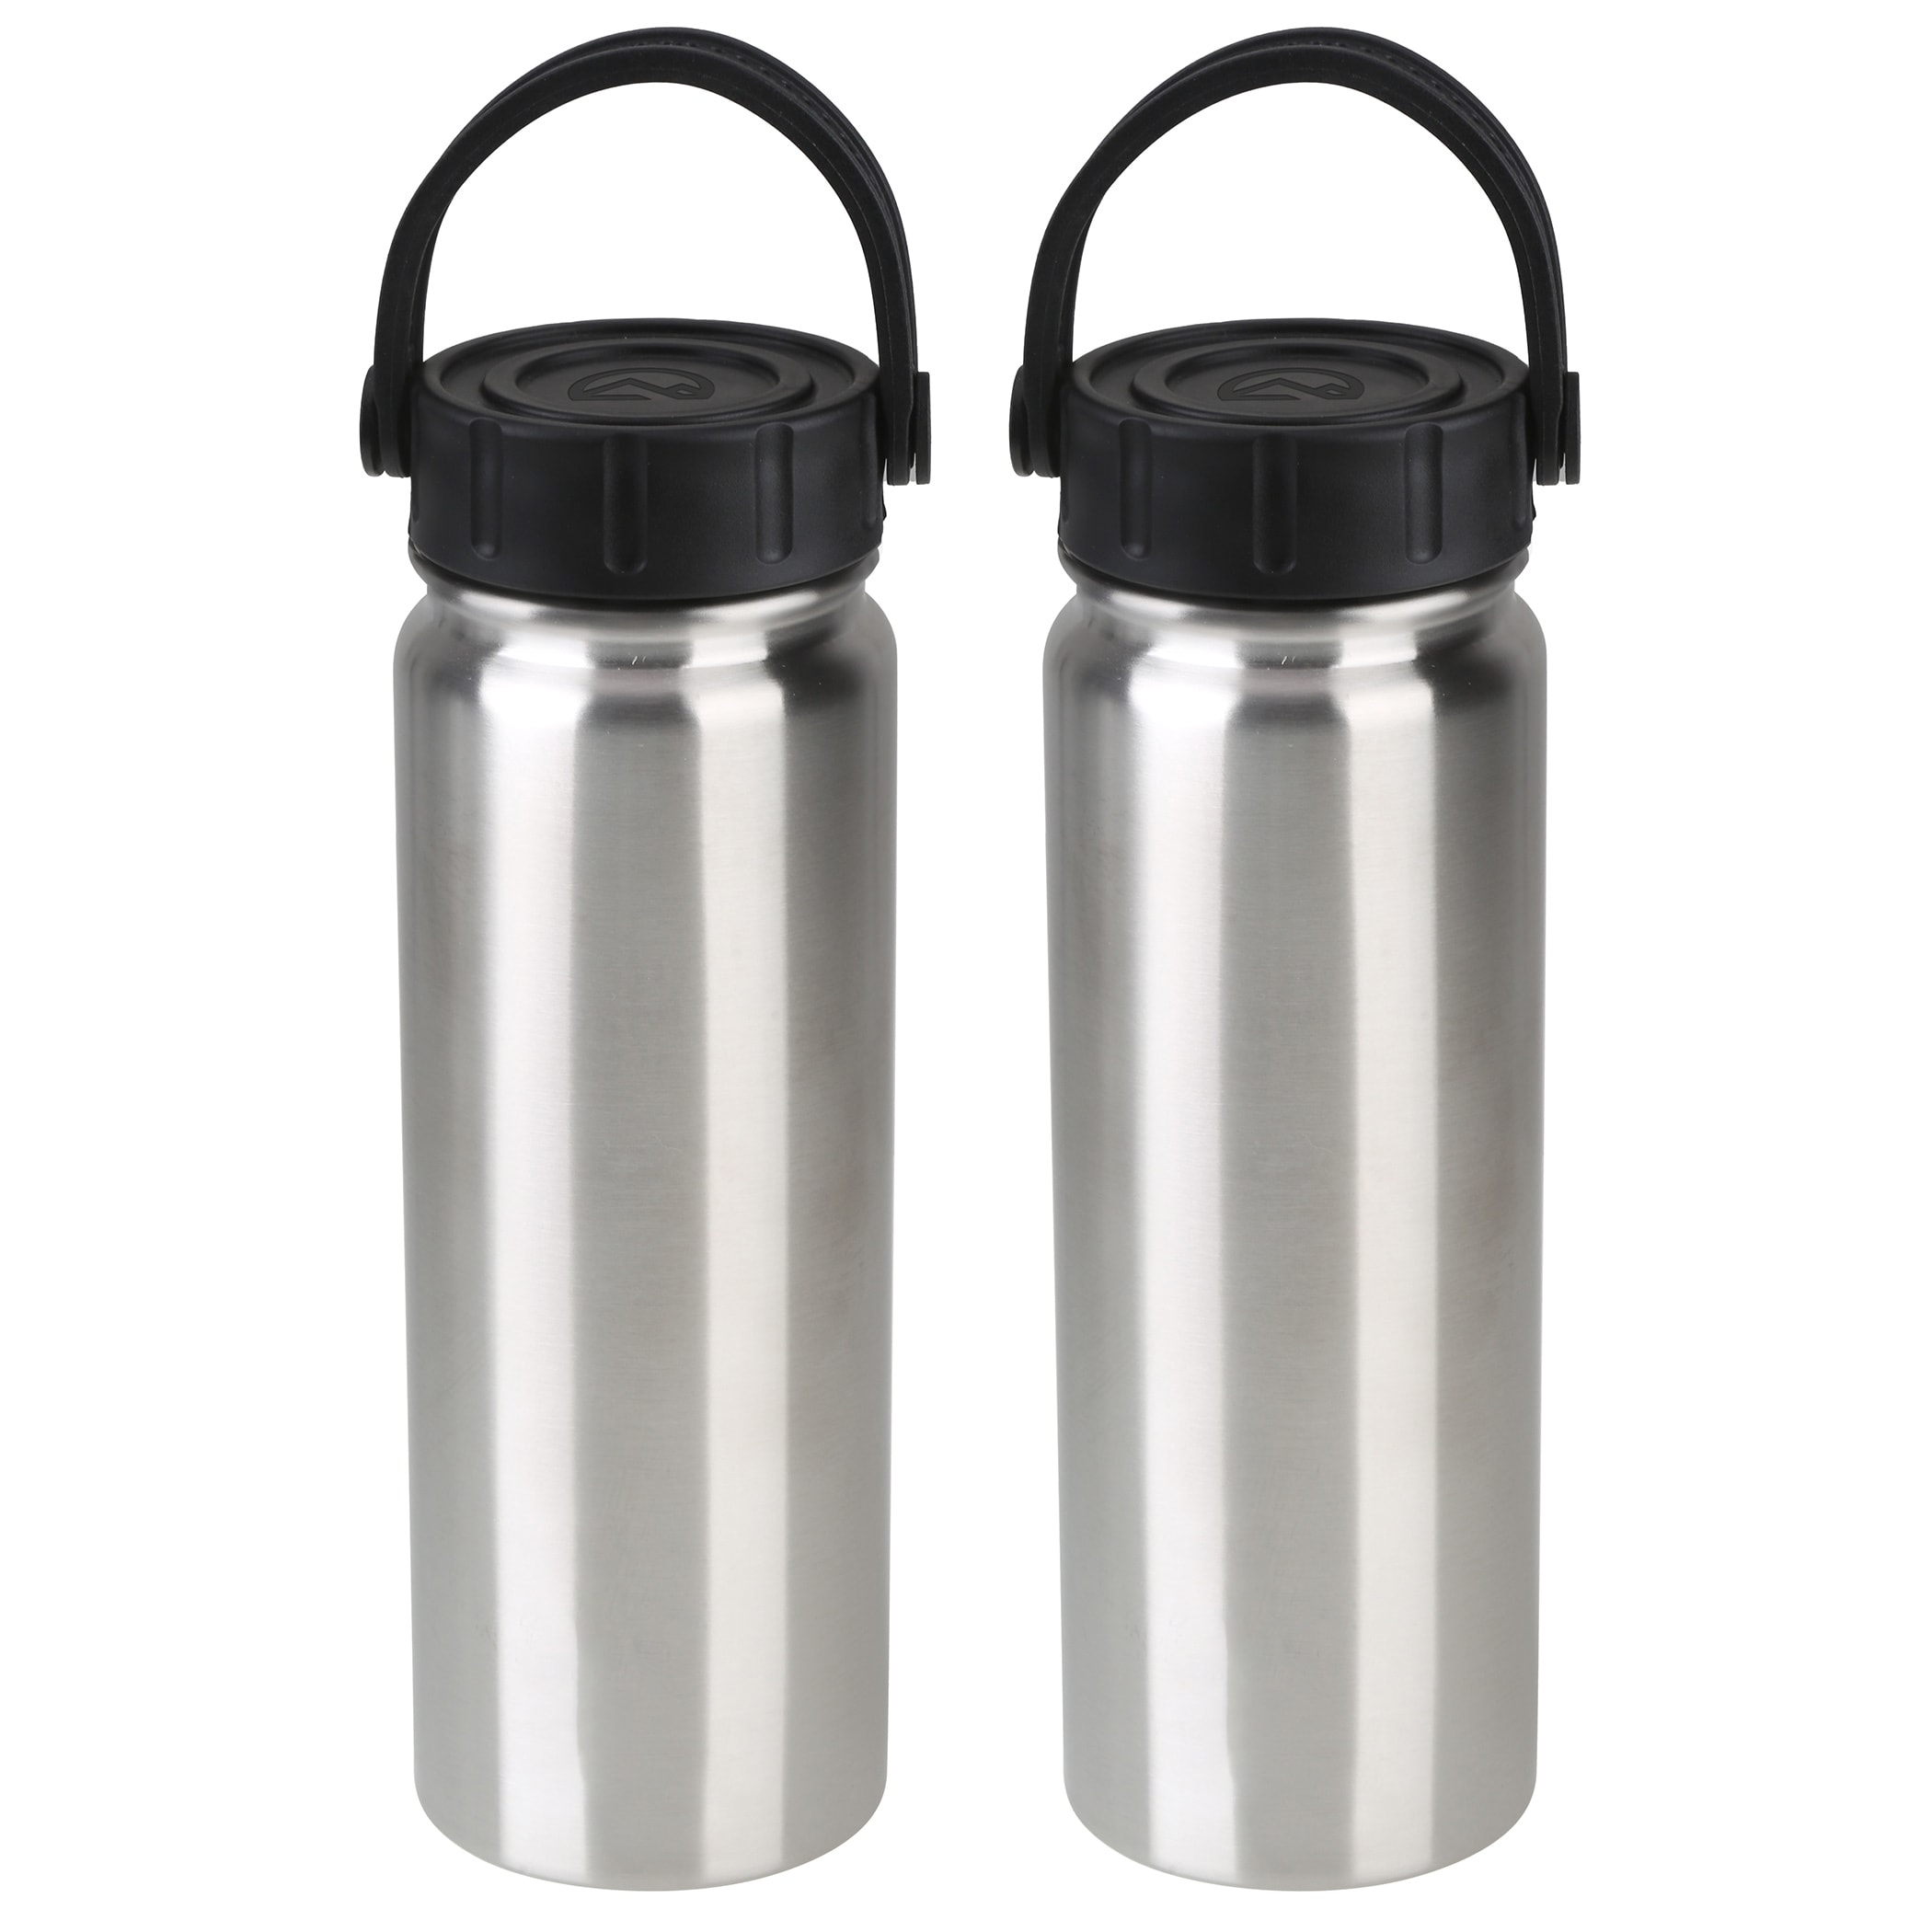 OLYMPIA OUTDOORS 20-fl oz Stainless Steel Insulated Tumbler Set (2